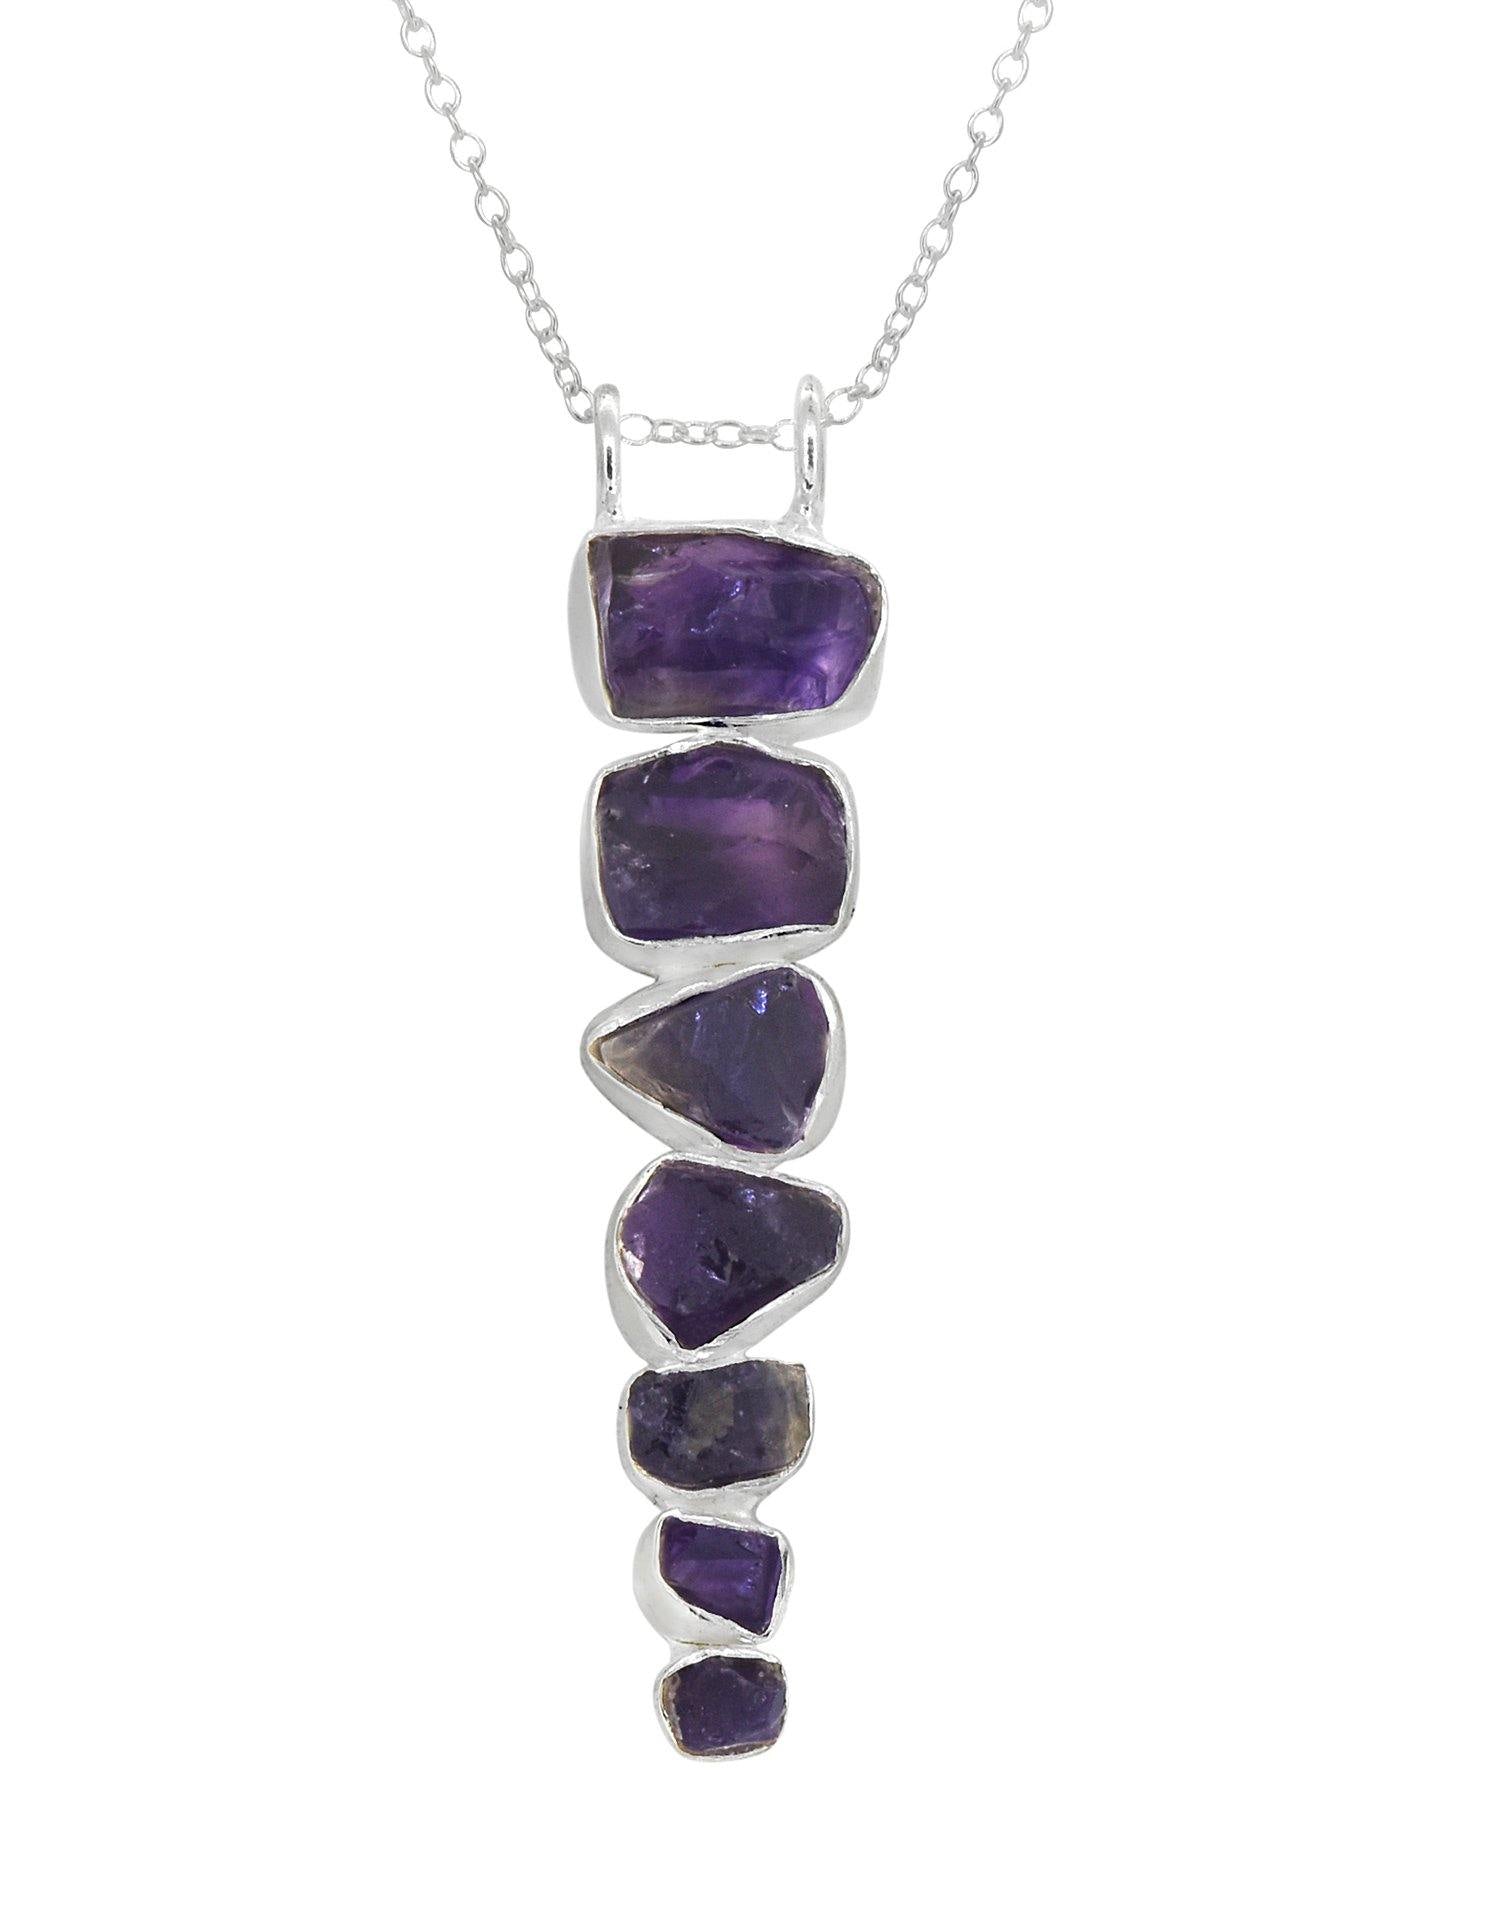 Natural Rough Amethyst Solid 925 Sterling Silver Long Pendant with 18 Inch Chain Necklace Jewelry - YoTreasure